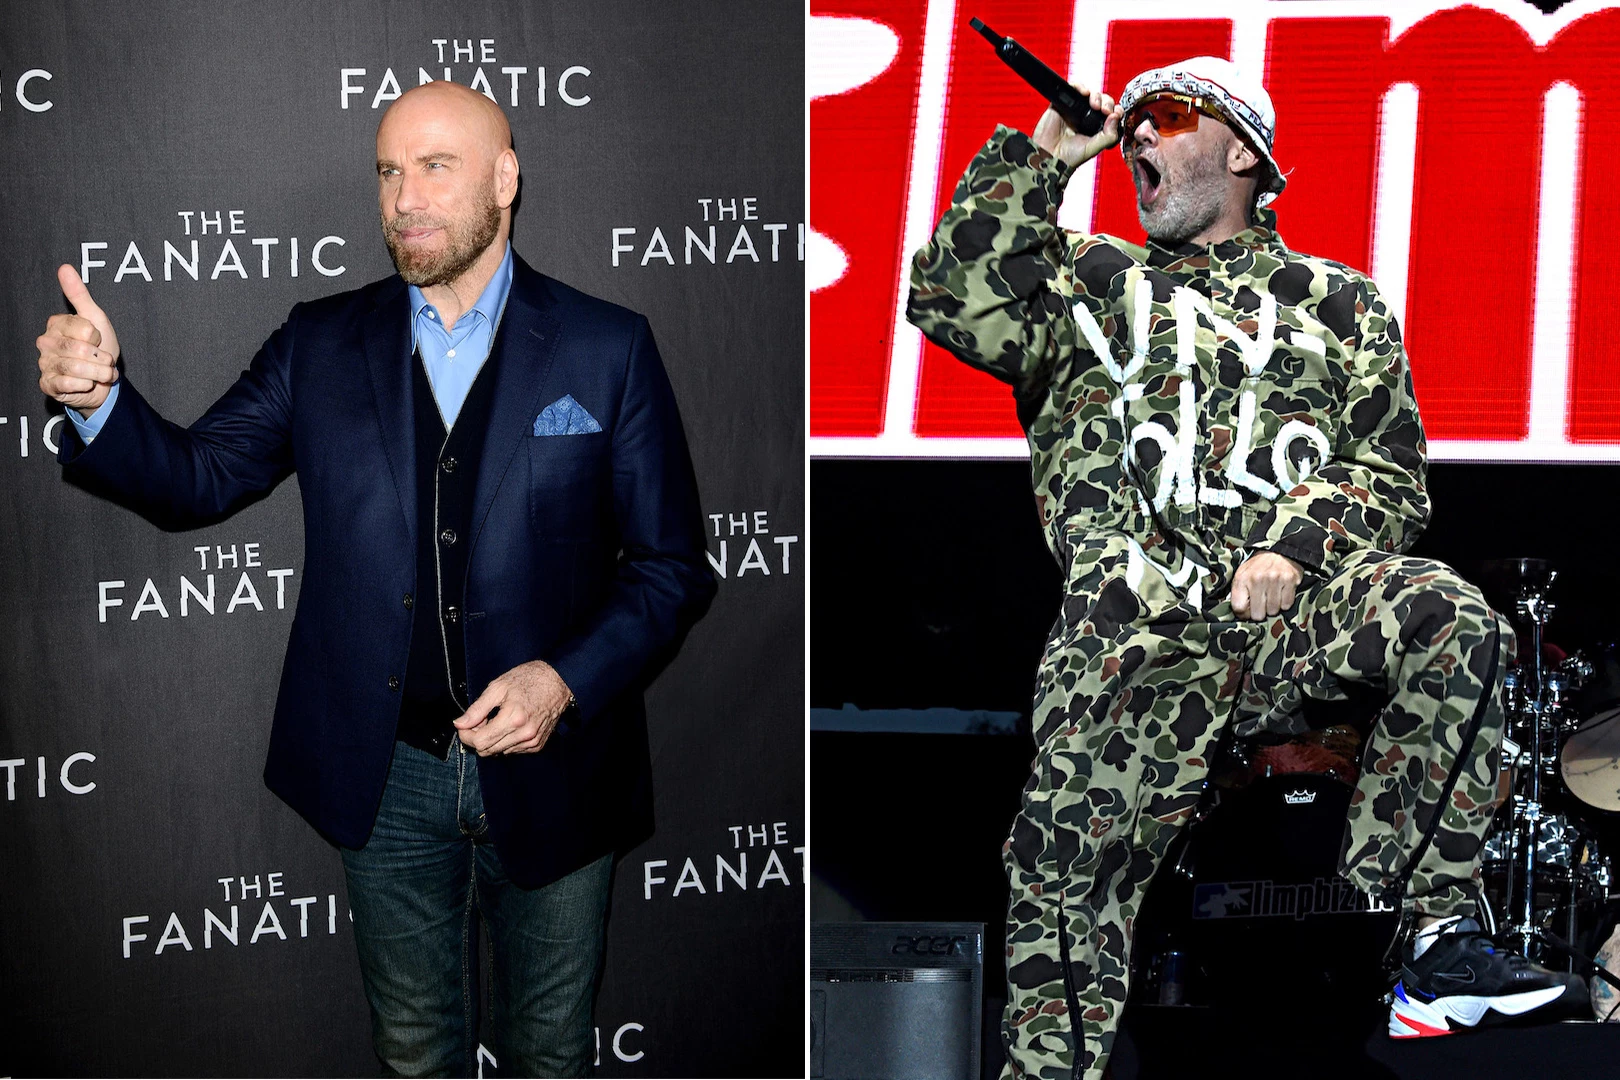 Fred Durst's New Movie Makes Just $3,000 Its Opening Weekend